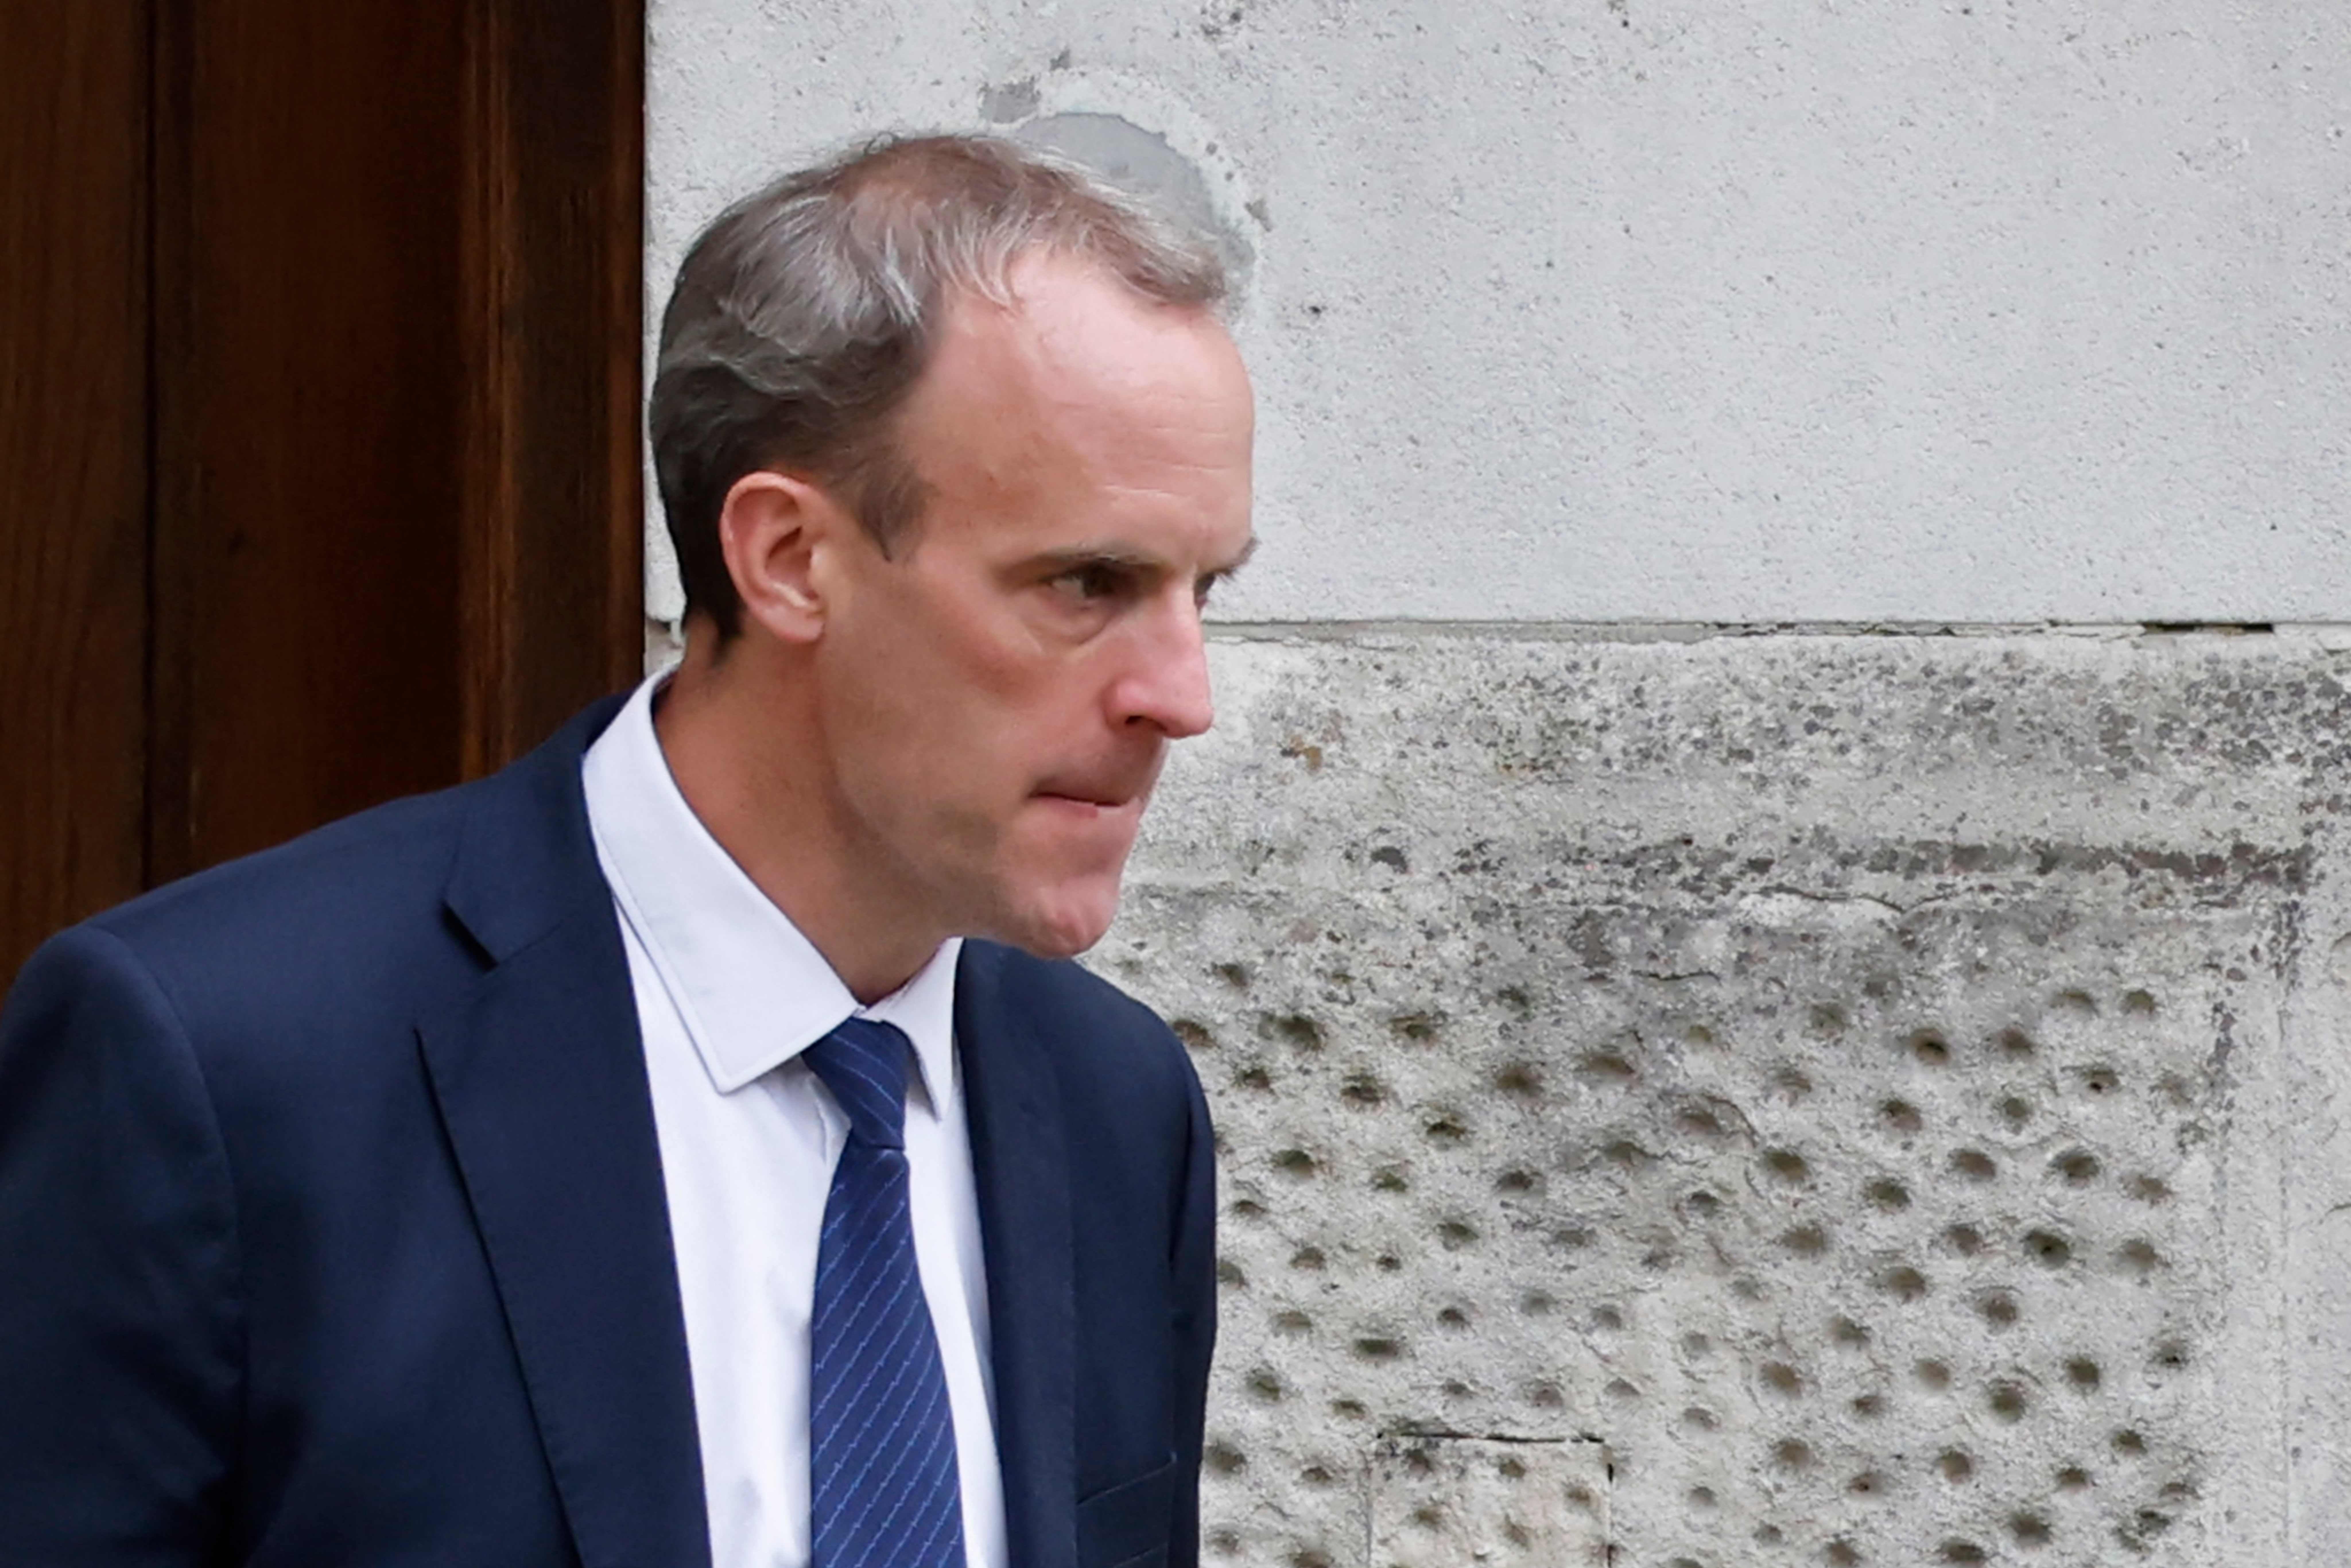 Dominic Raab has escaped justified calls for his resignation